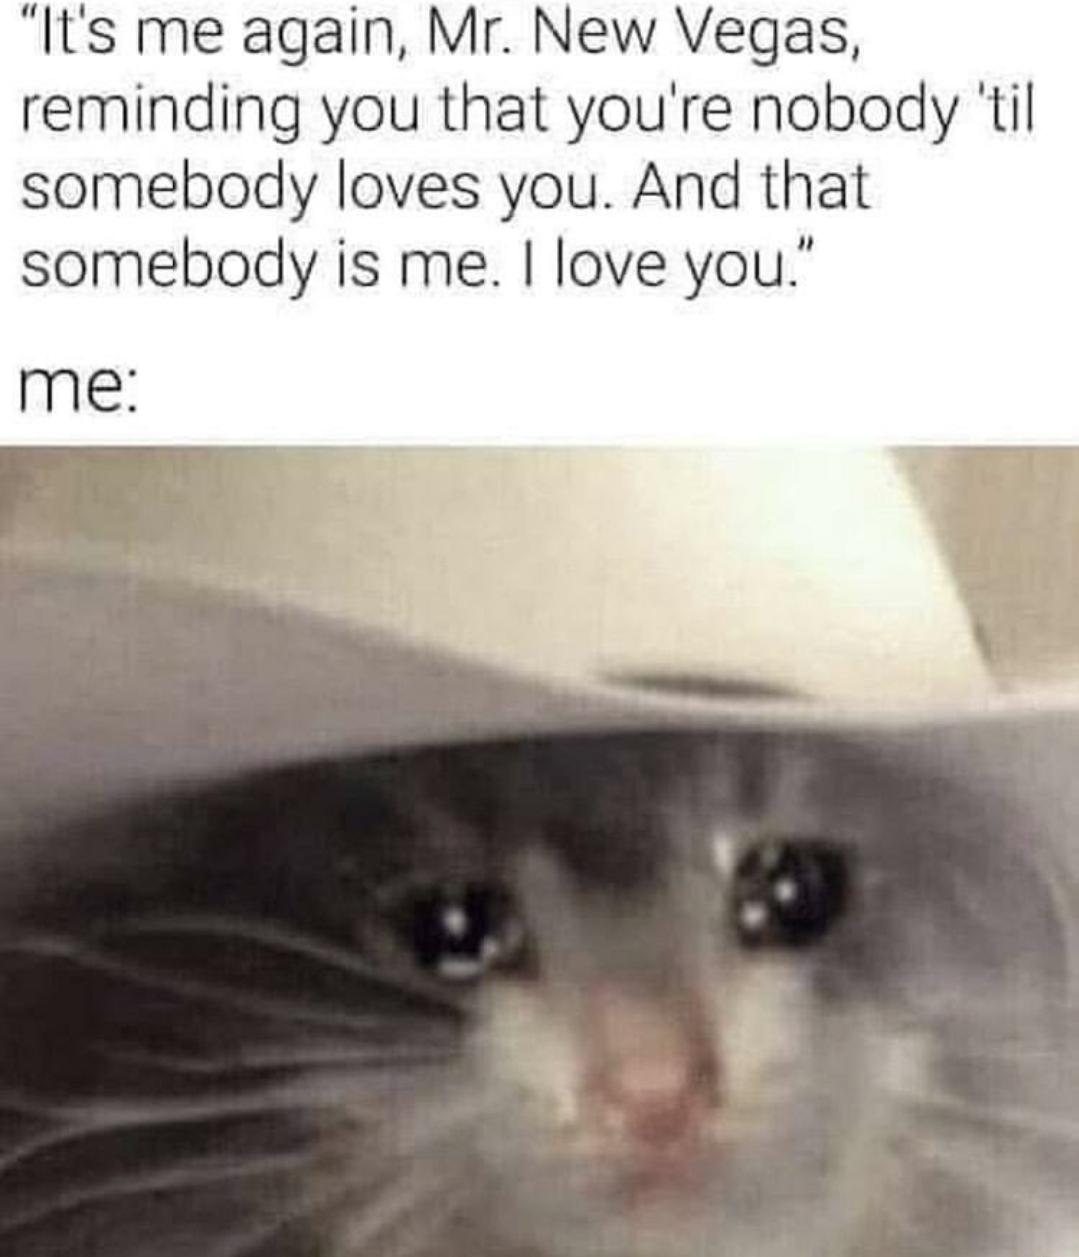 fresh memes - whiskers - "It's me again, Mr. New Vegas, reminding you that you're nobody 'til somebody loves you. And that somebody is me. I love you." me